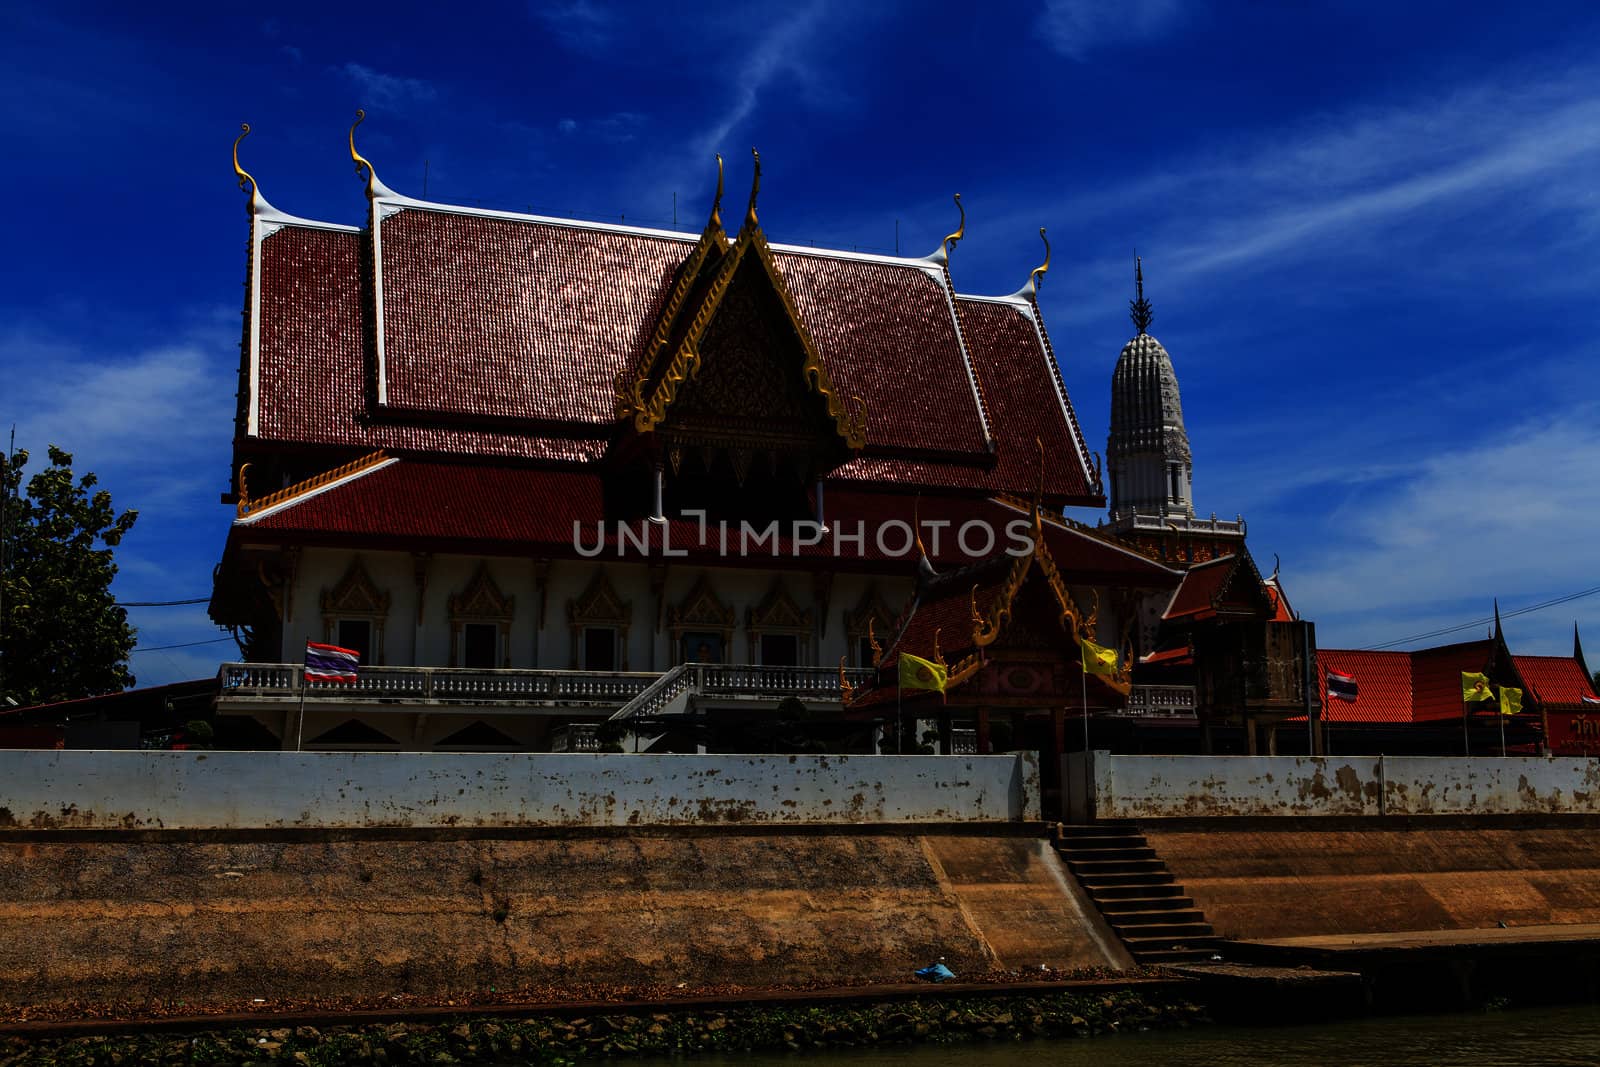 Thai temple at Ayutthaya in Thailand  by thanomphong